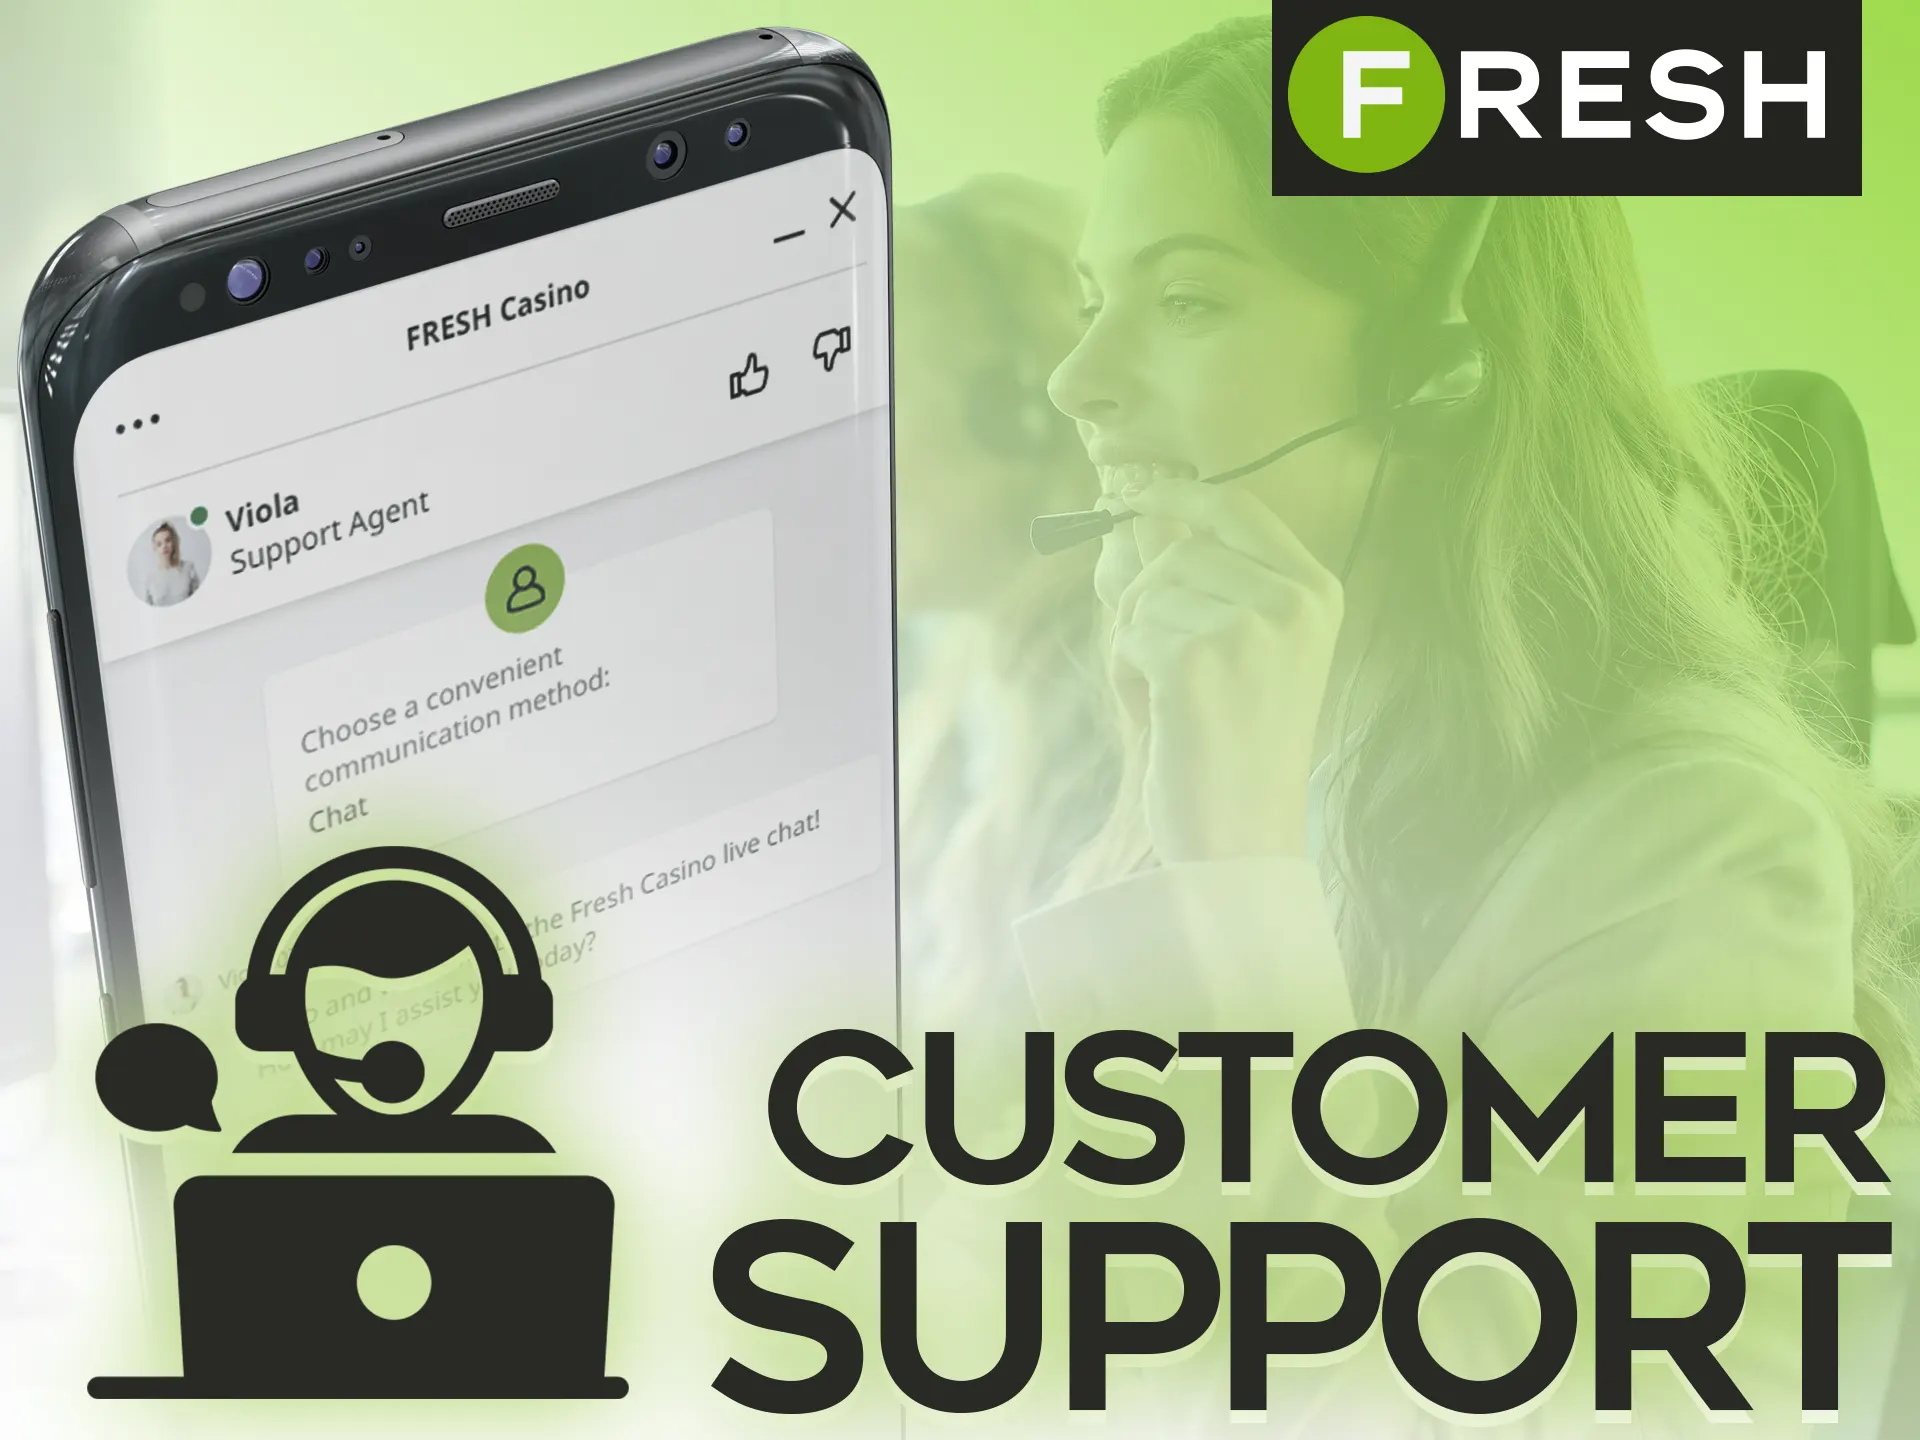 Ask a Fresh Casino support for help in the app if your have problems with something.